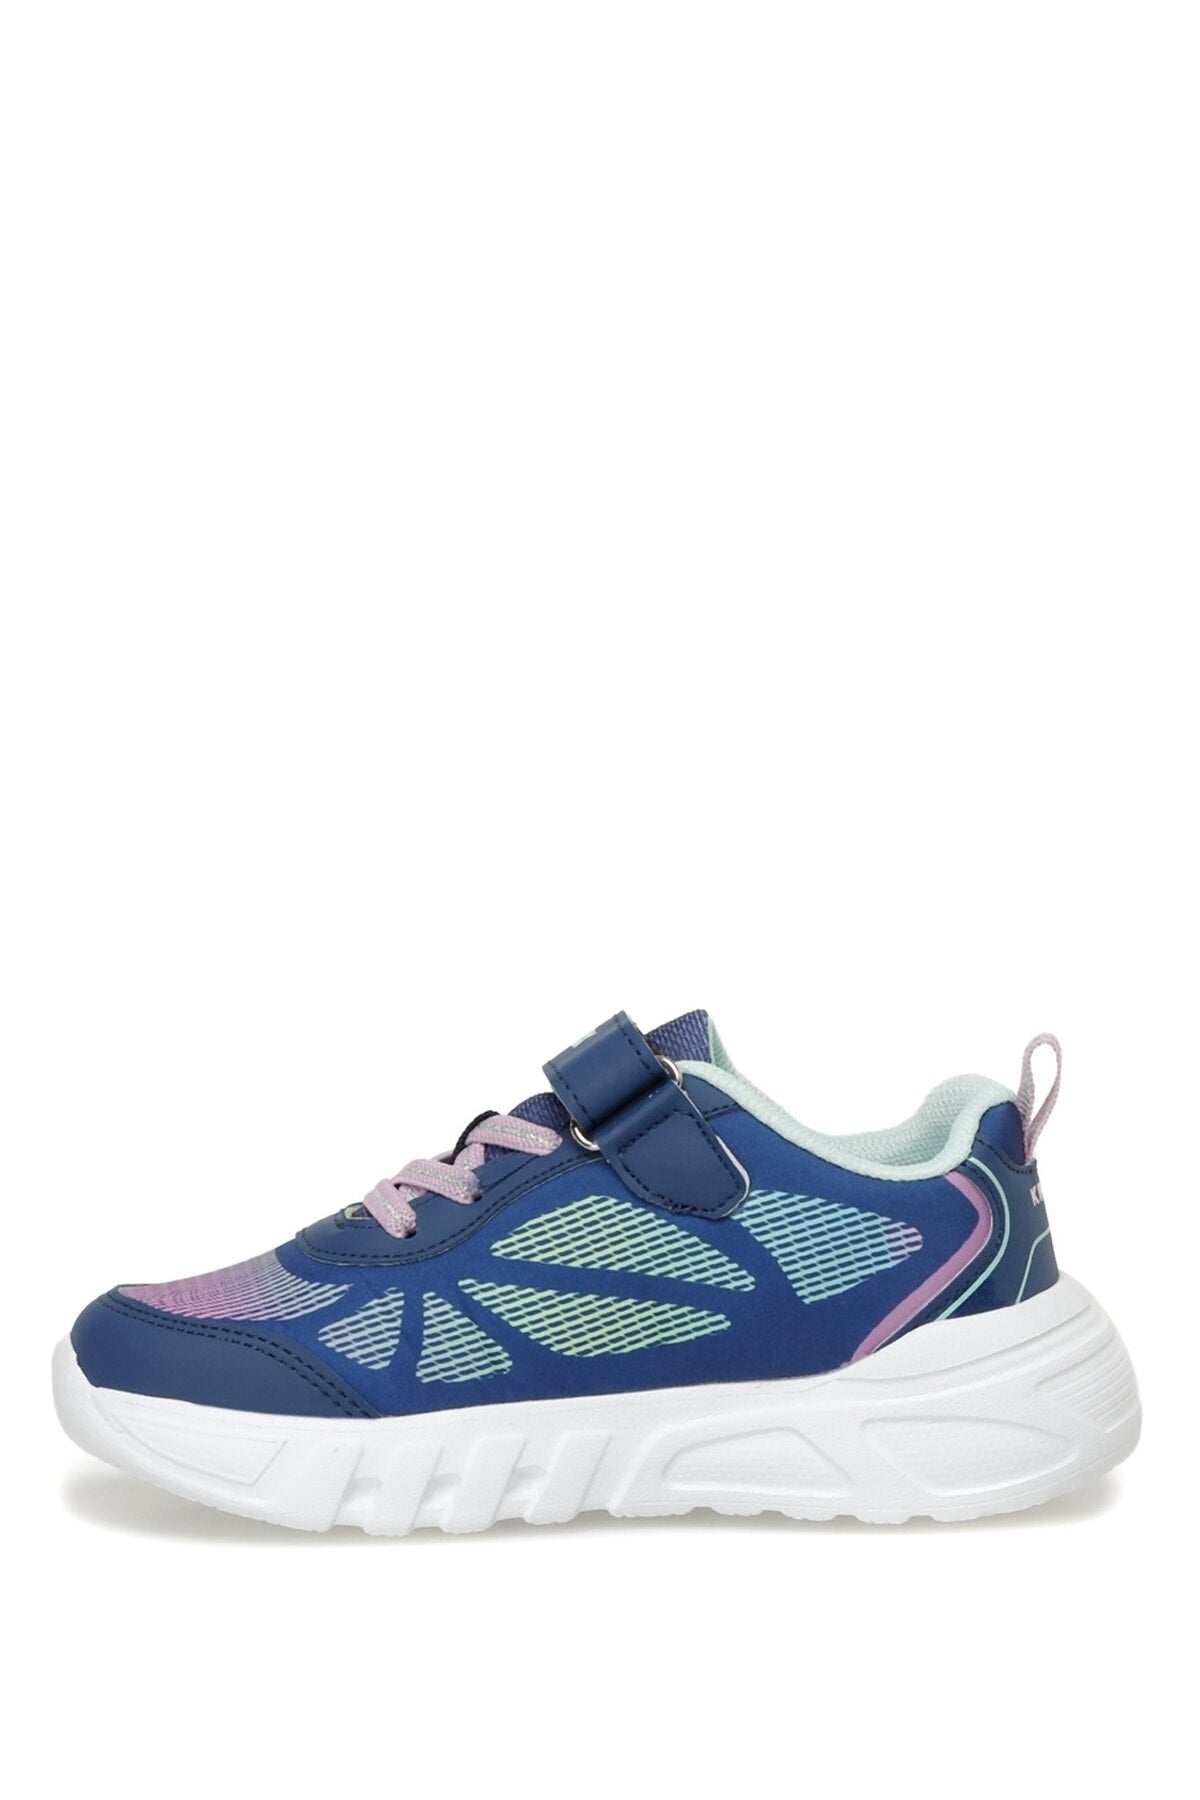 Mags 3fx Navy Blue Girls' Sneakers